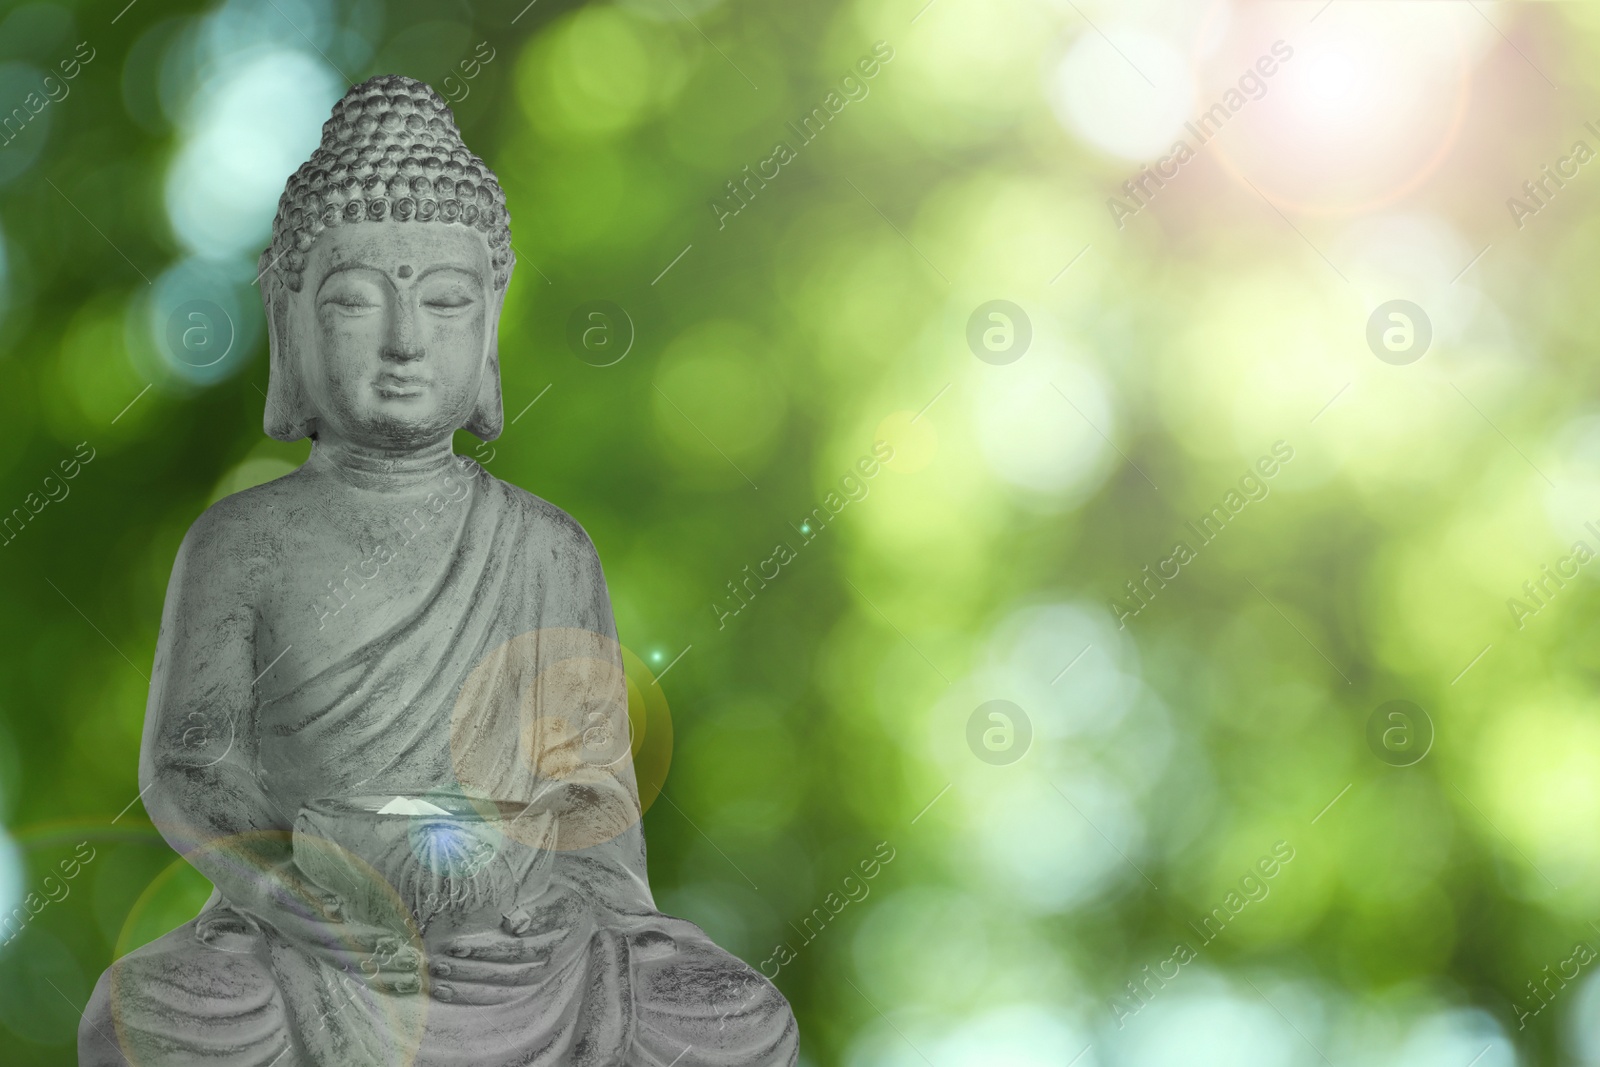 Image of Stone Buddha sculpture outdoors. Space for text